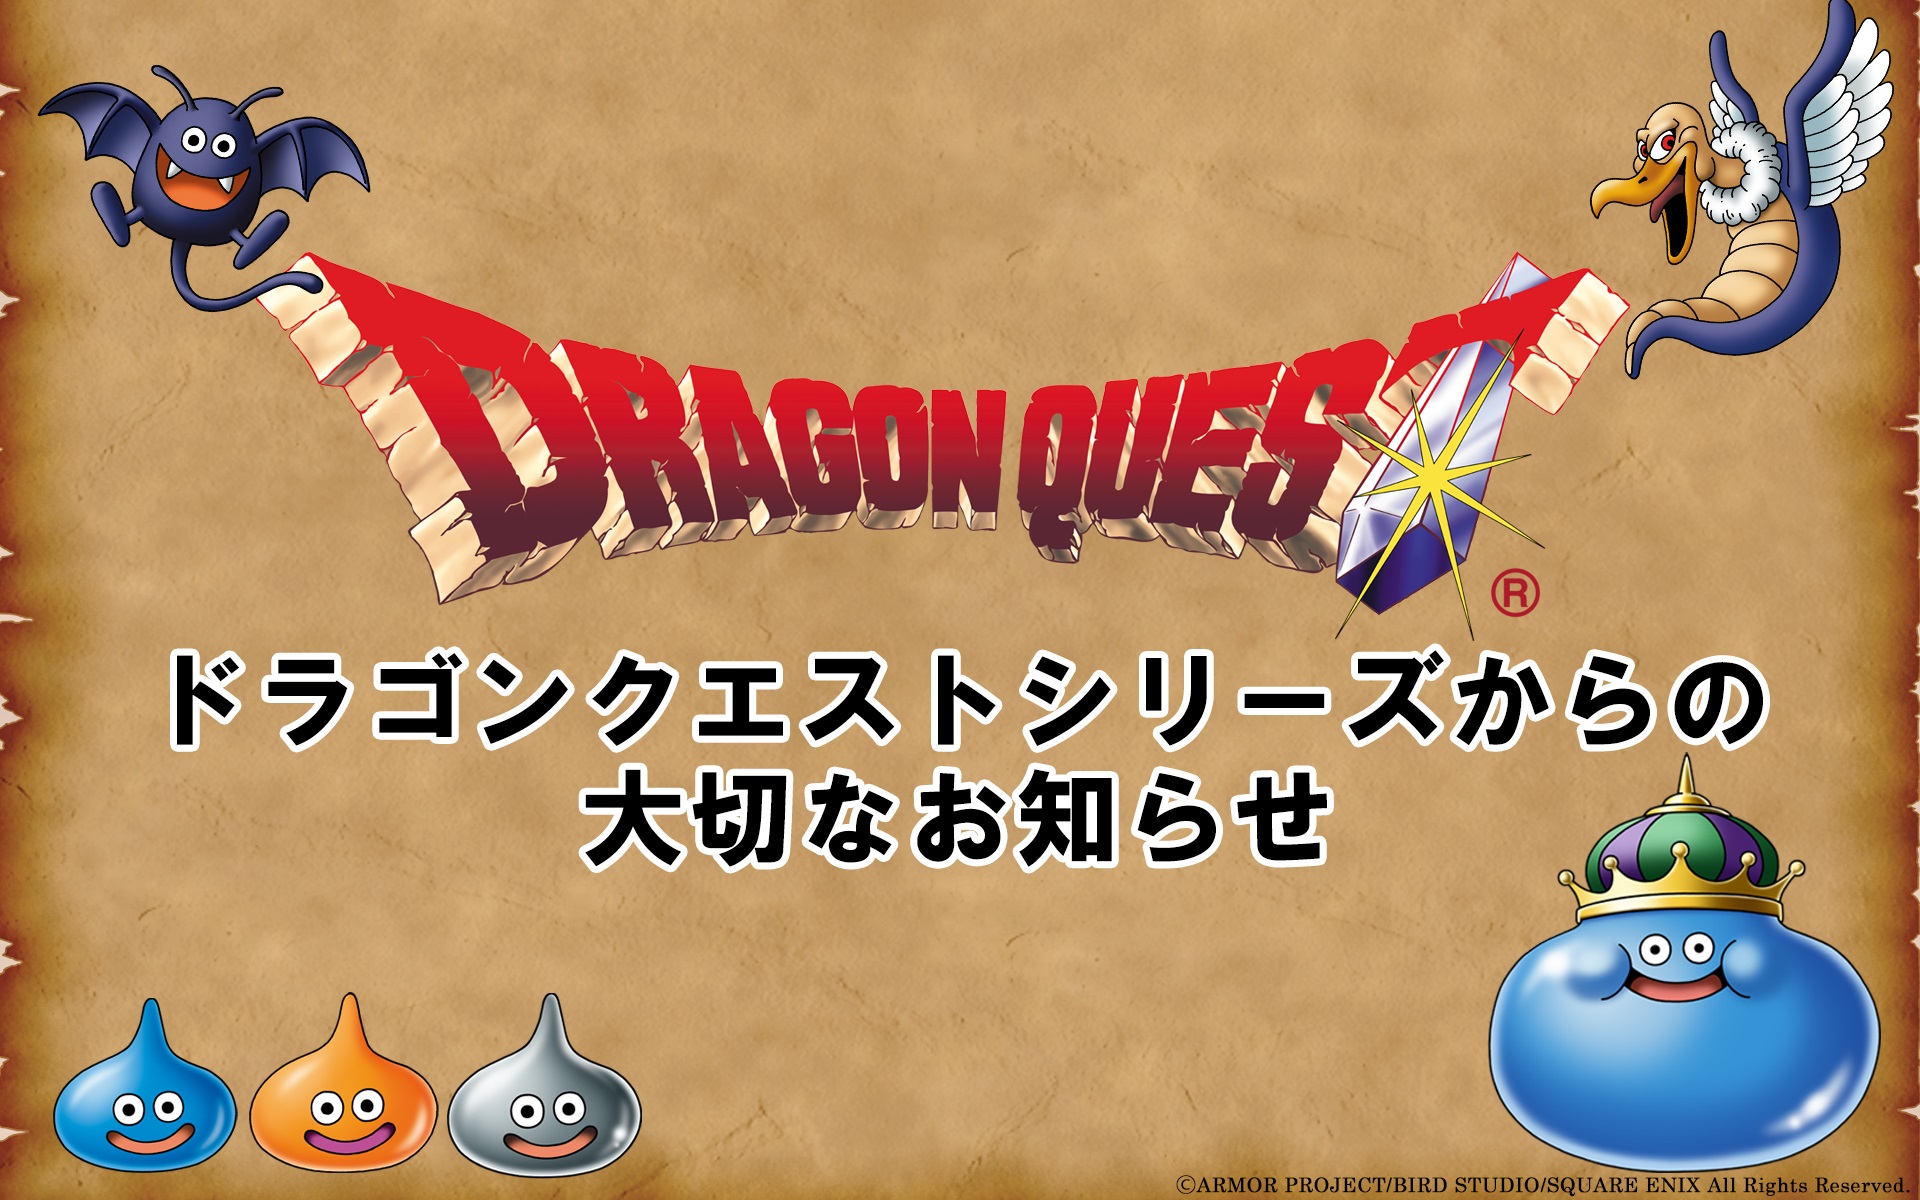 Square Enix Fully Lifts Restrictions on Dragon Quest Livestreaming